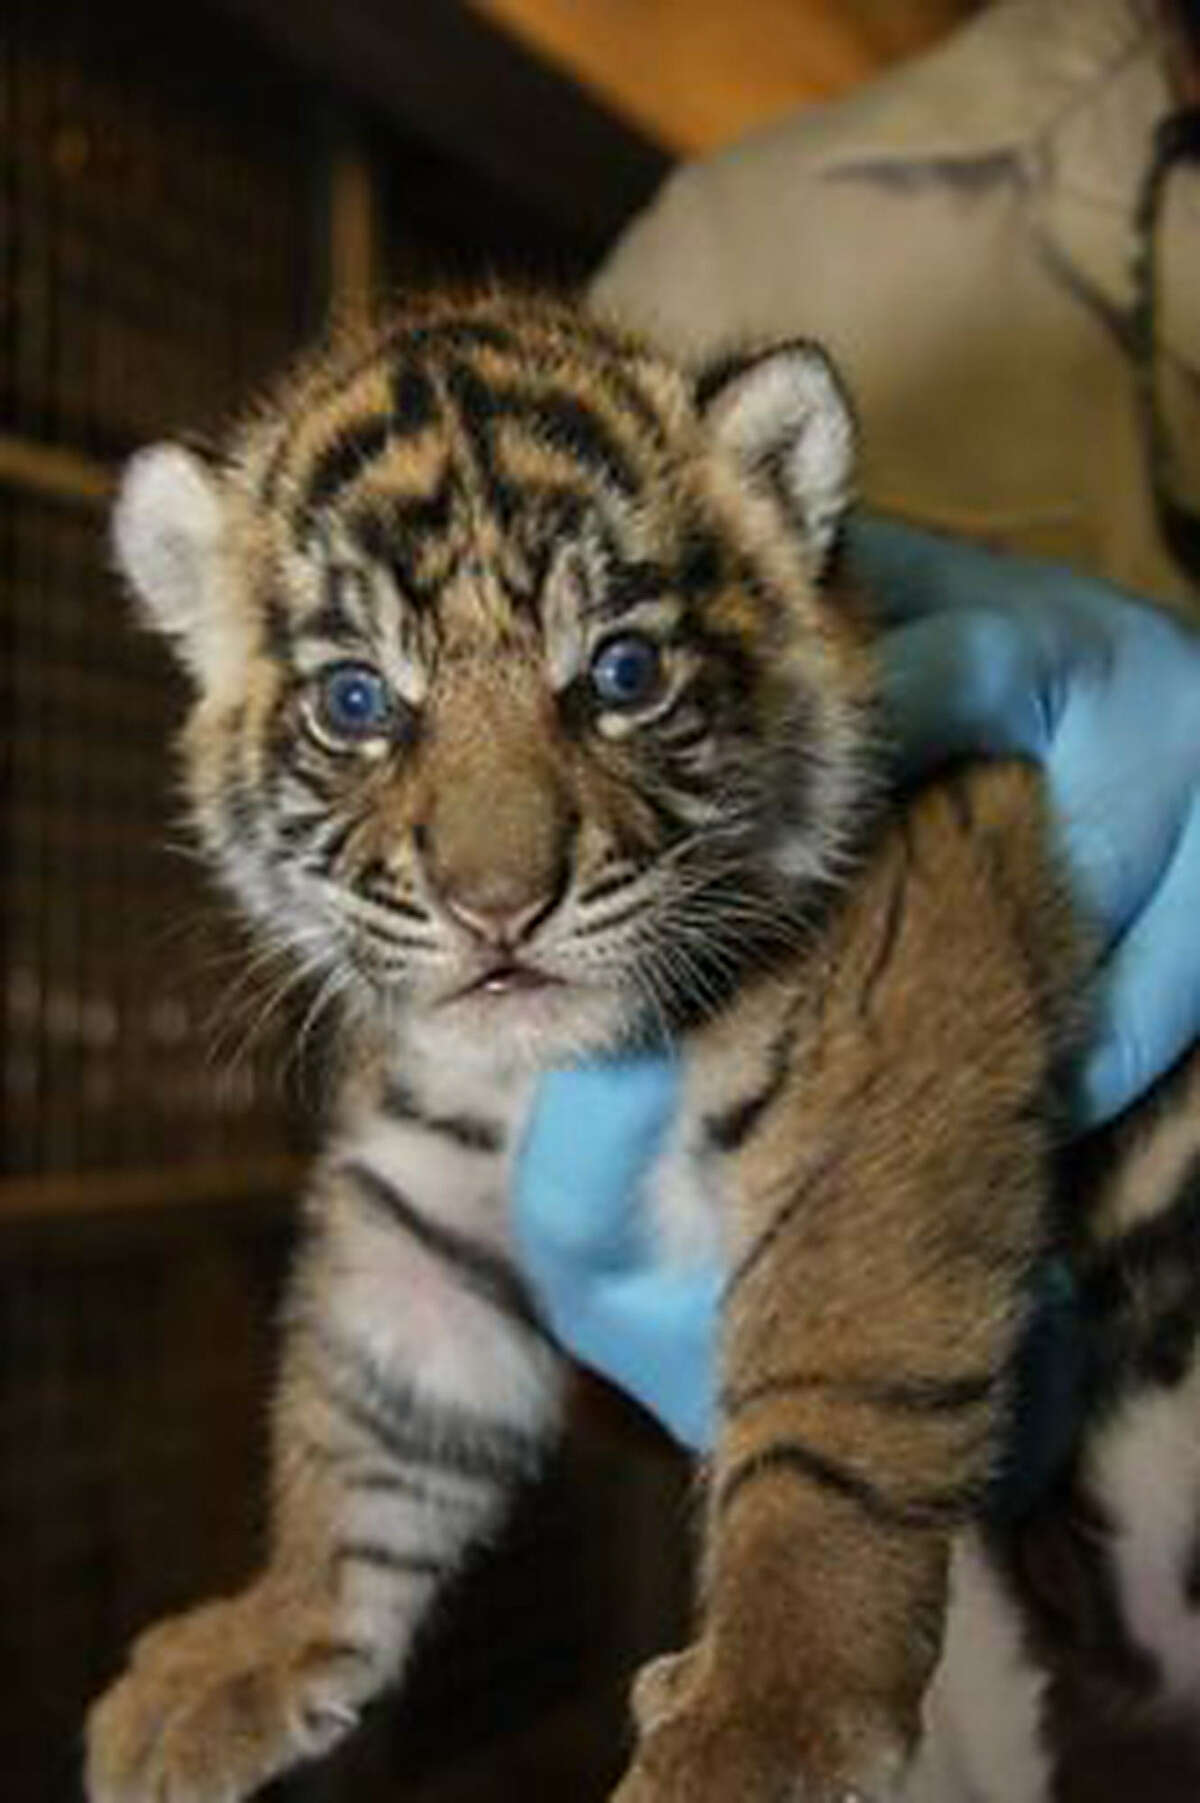 Two Sumatran tiger cubs, born at the San Antonio Zoo early last month, appear to be vocalizing their enthusiasm (top) about their Facebook debut — though they do not yet have names. One of the cubs (above) receives her first medical checkup at the zoo.